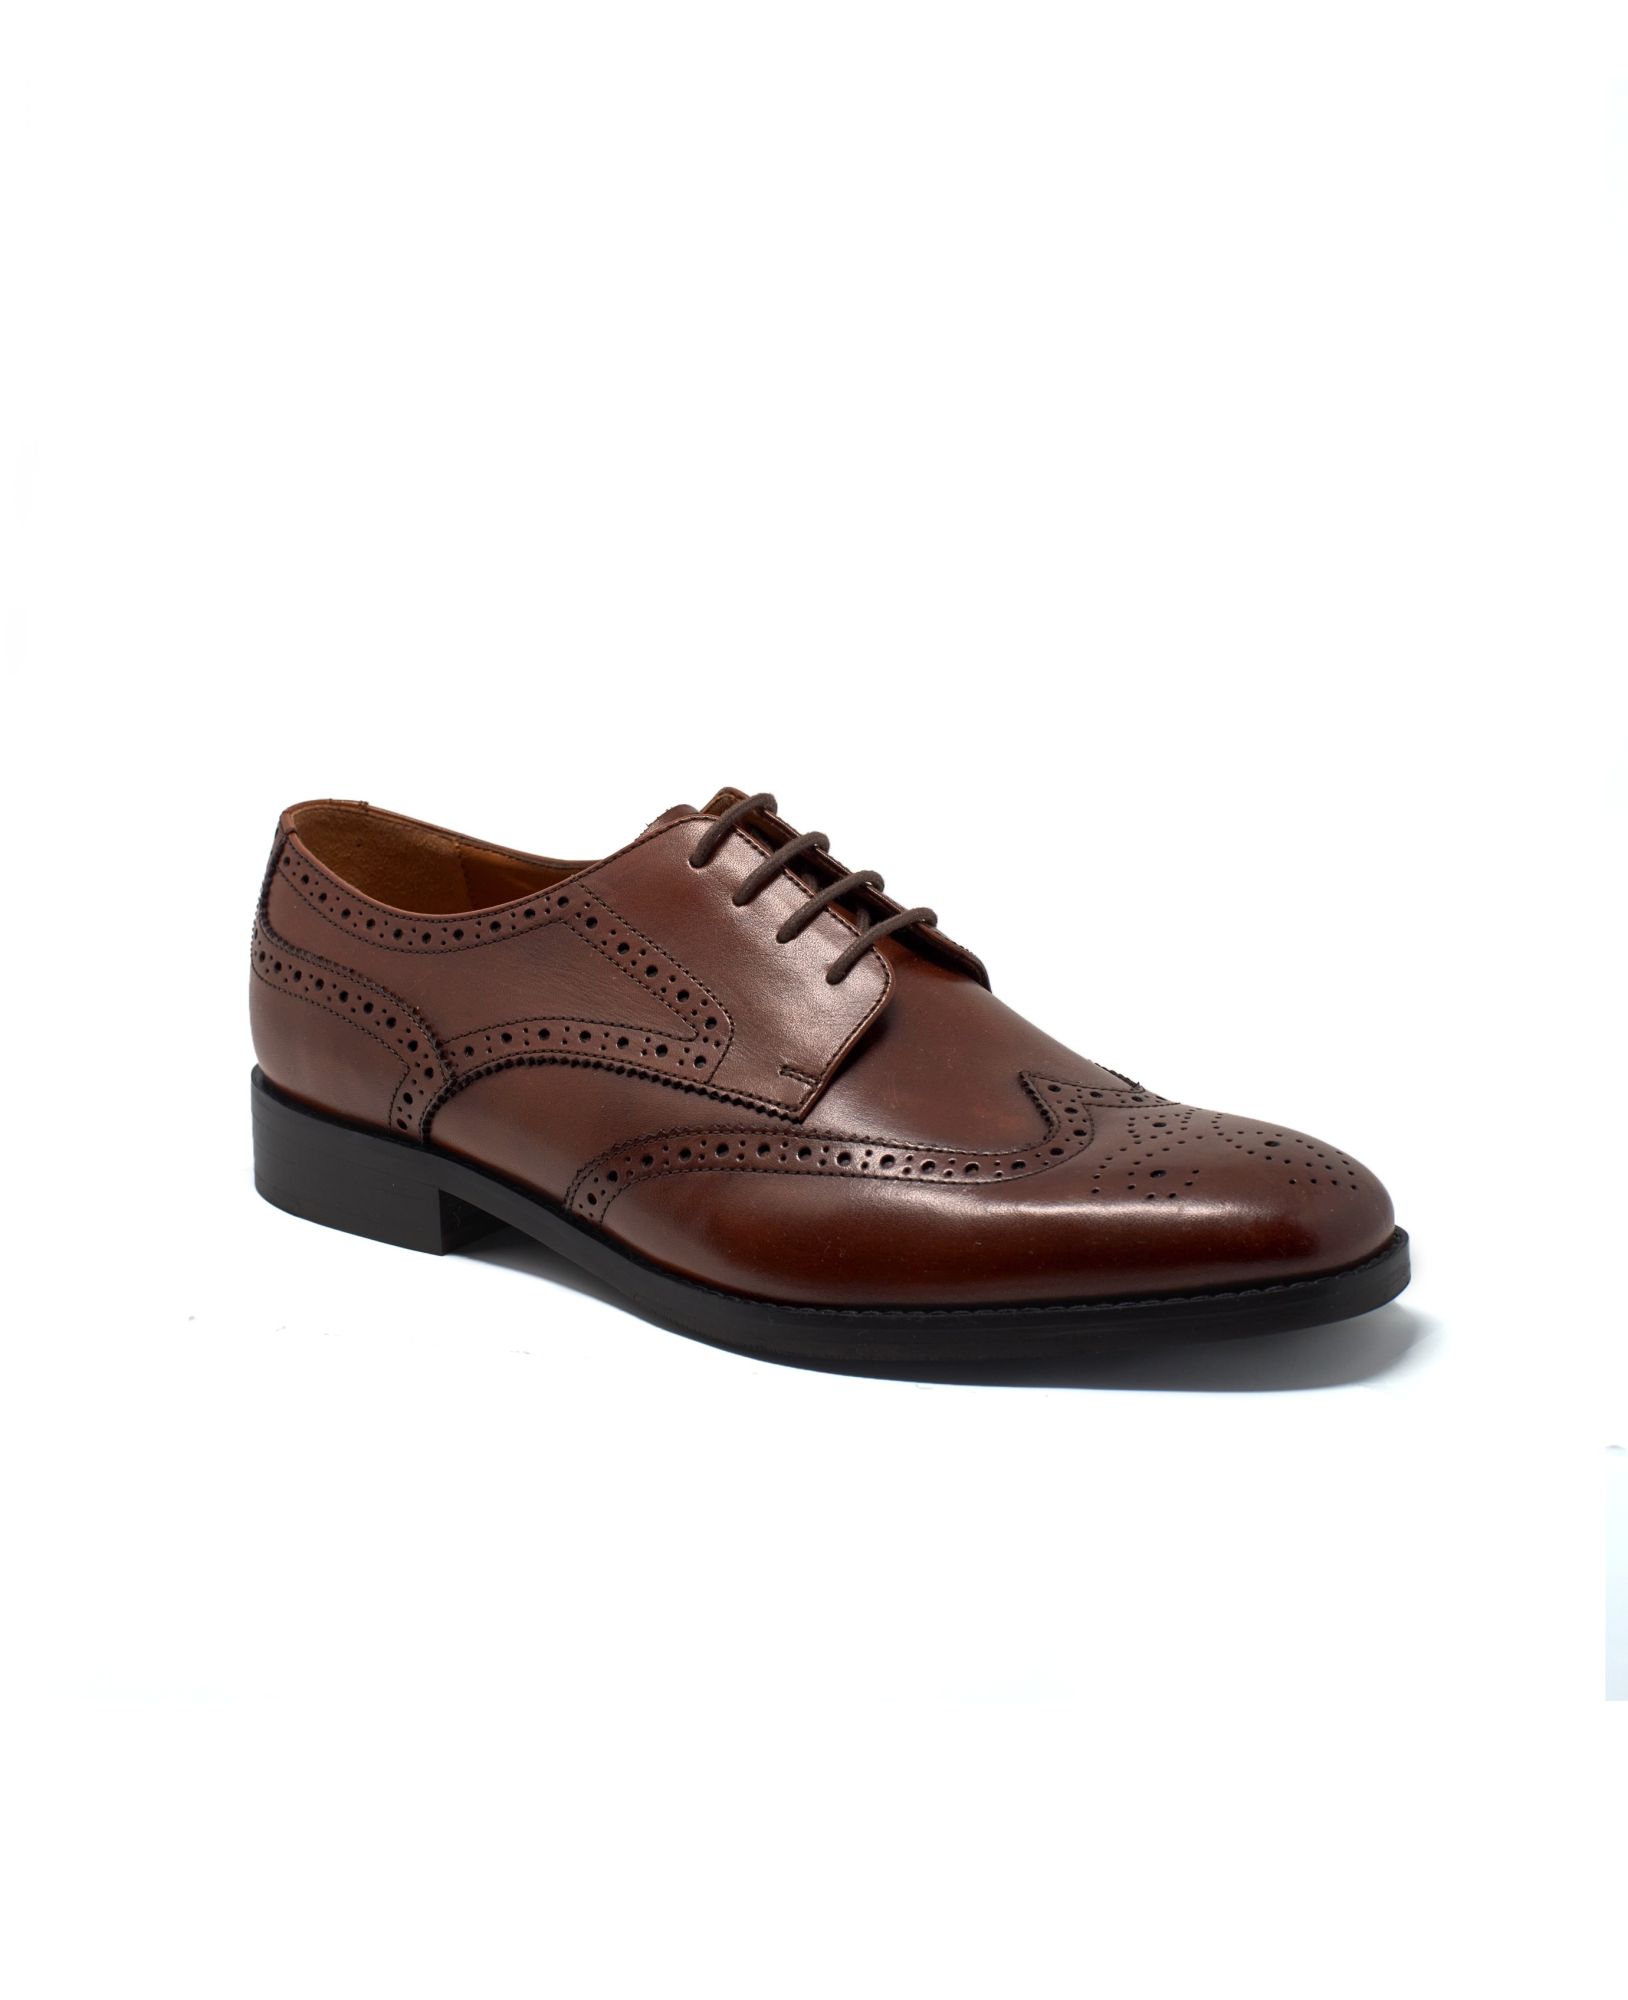 Chocolate Brown Leather Derby Shoes With Brogue Detailing 7